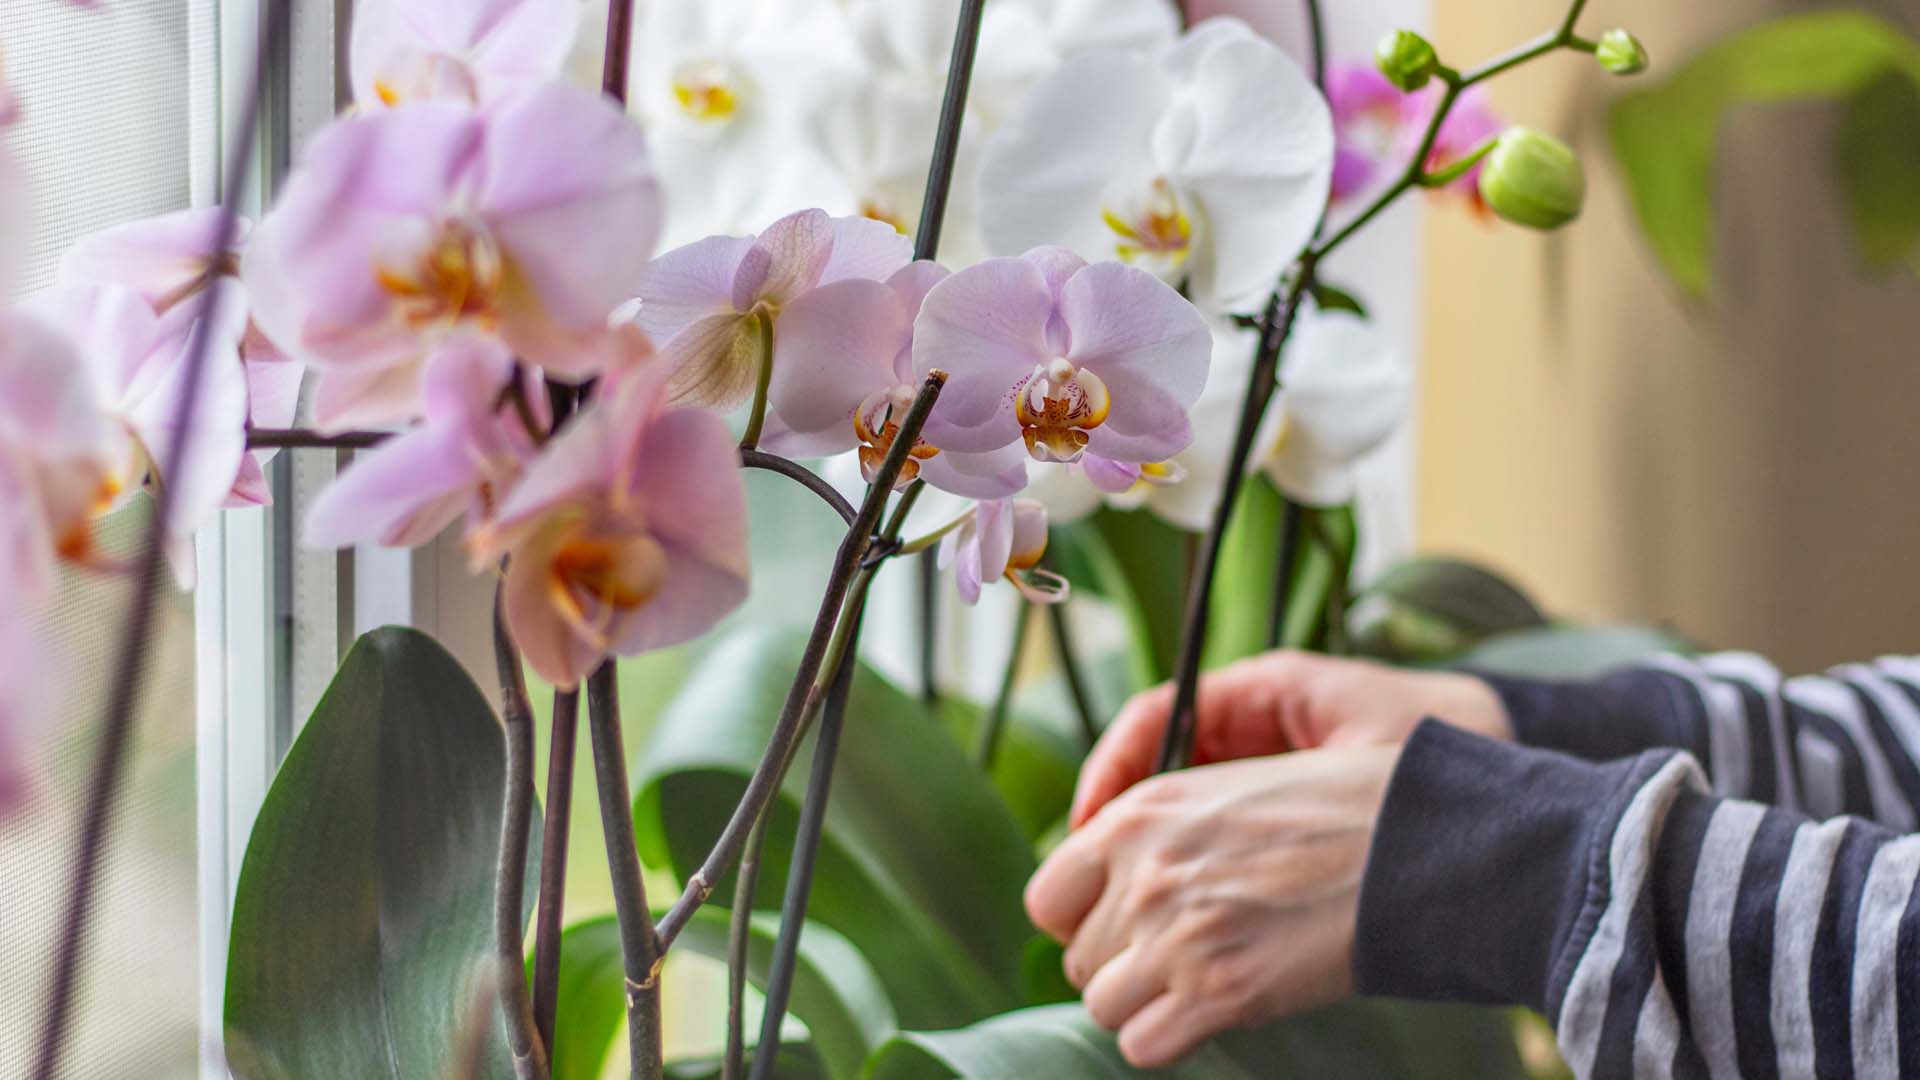 Moth orchids are often found on sale in supermarkets